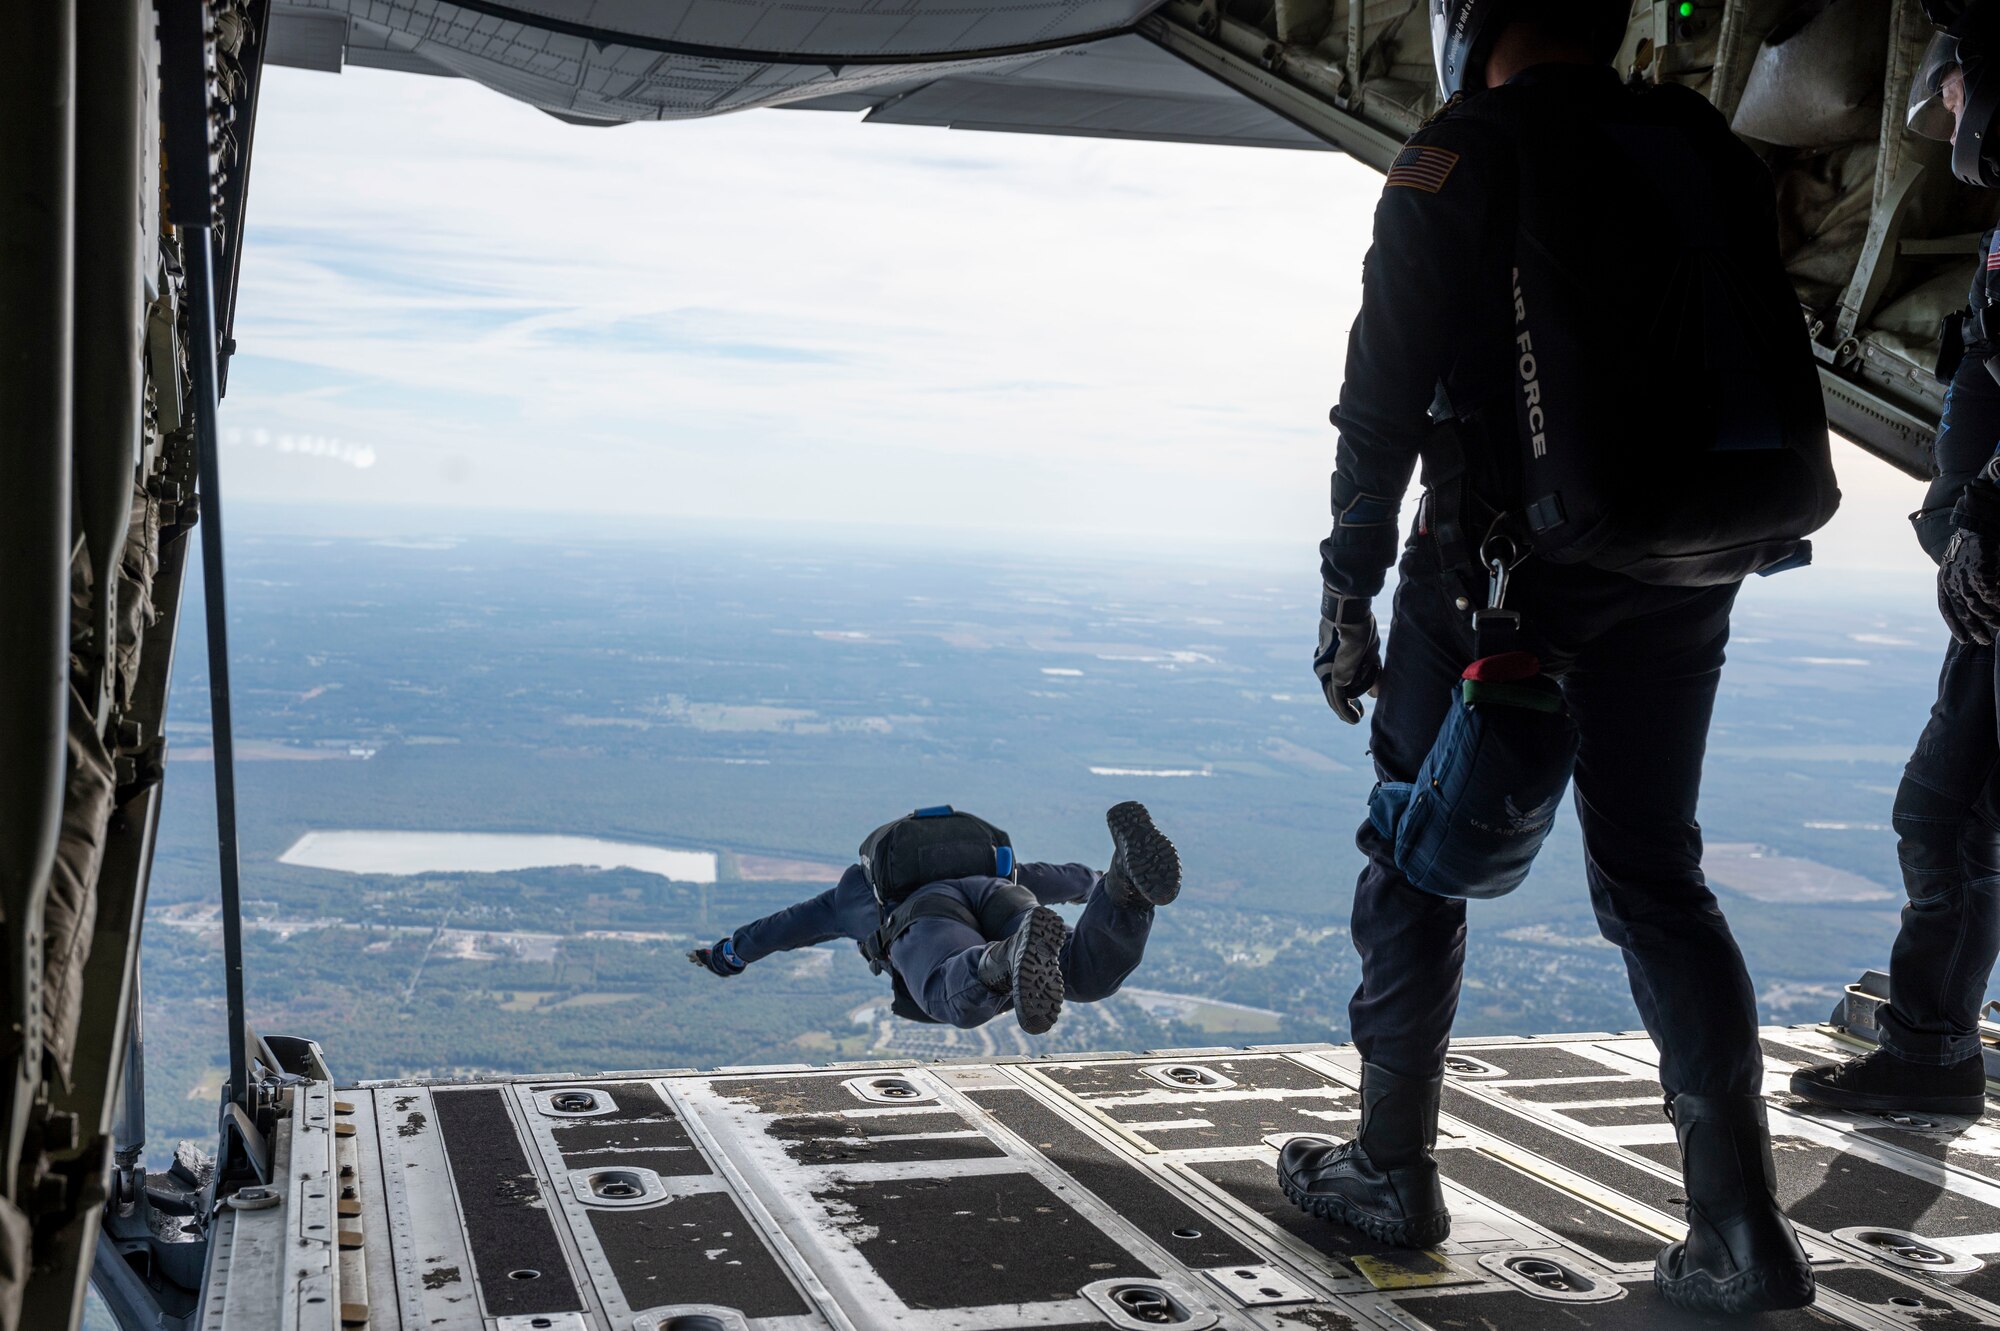 Paratrooper jumping out of plane